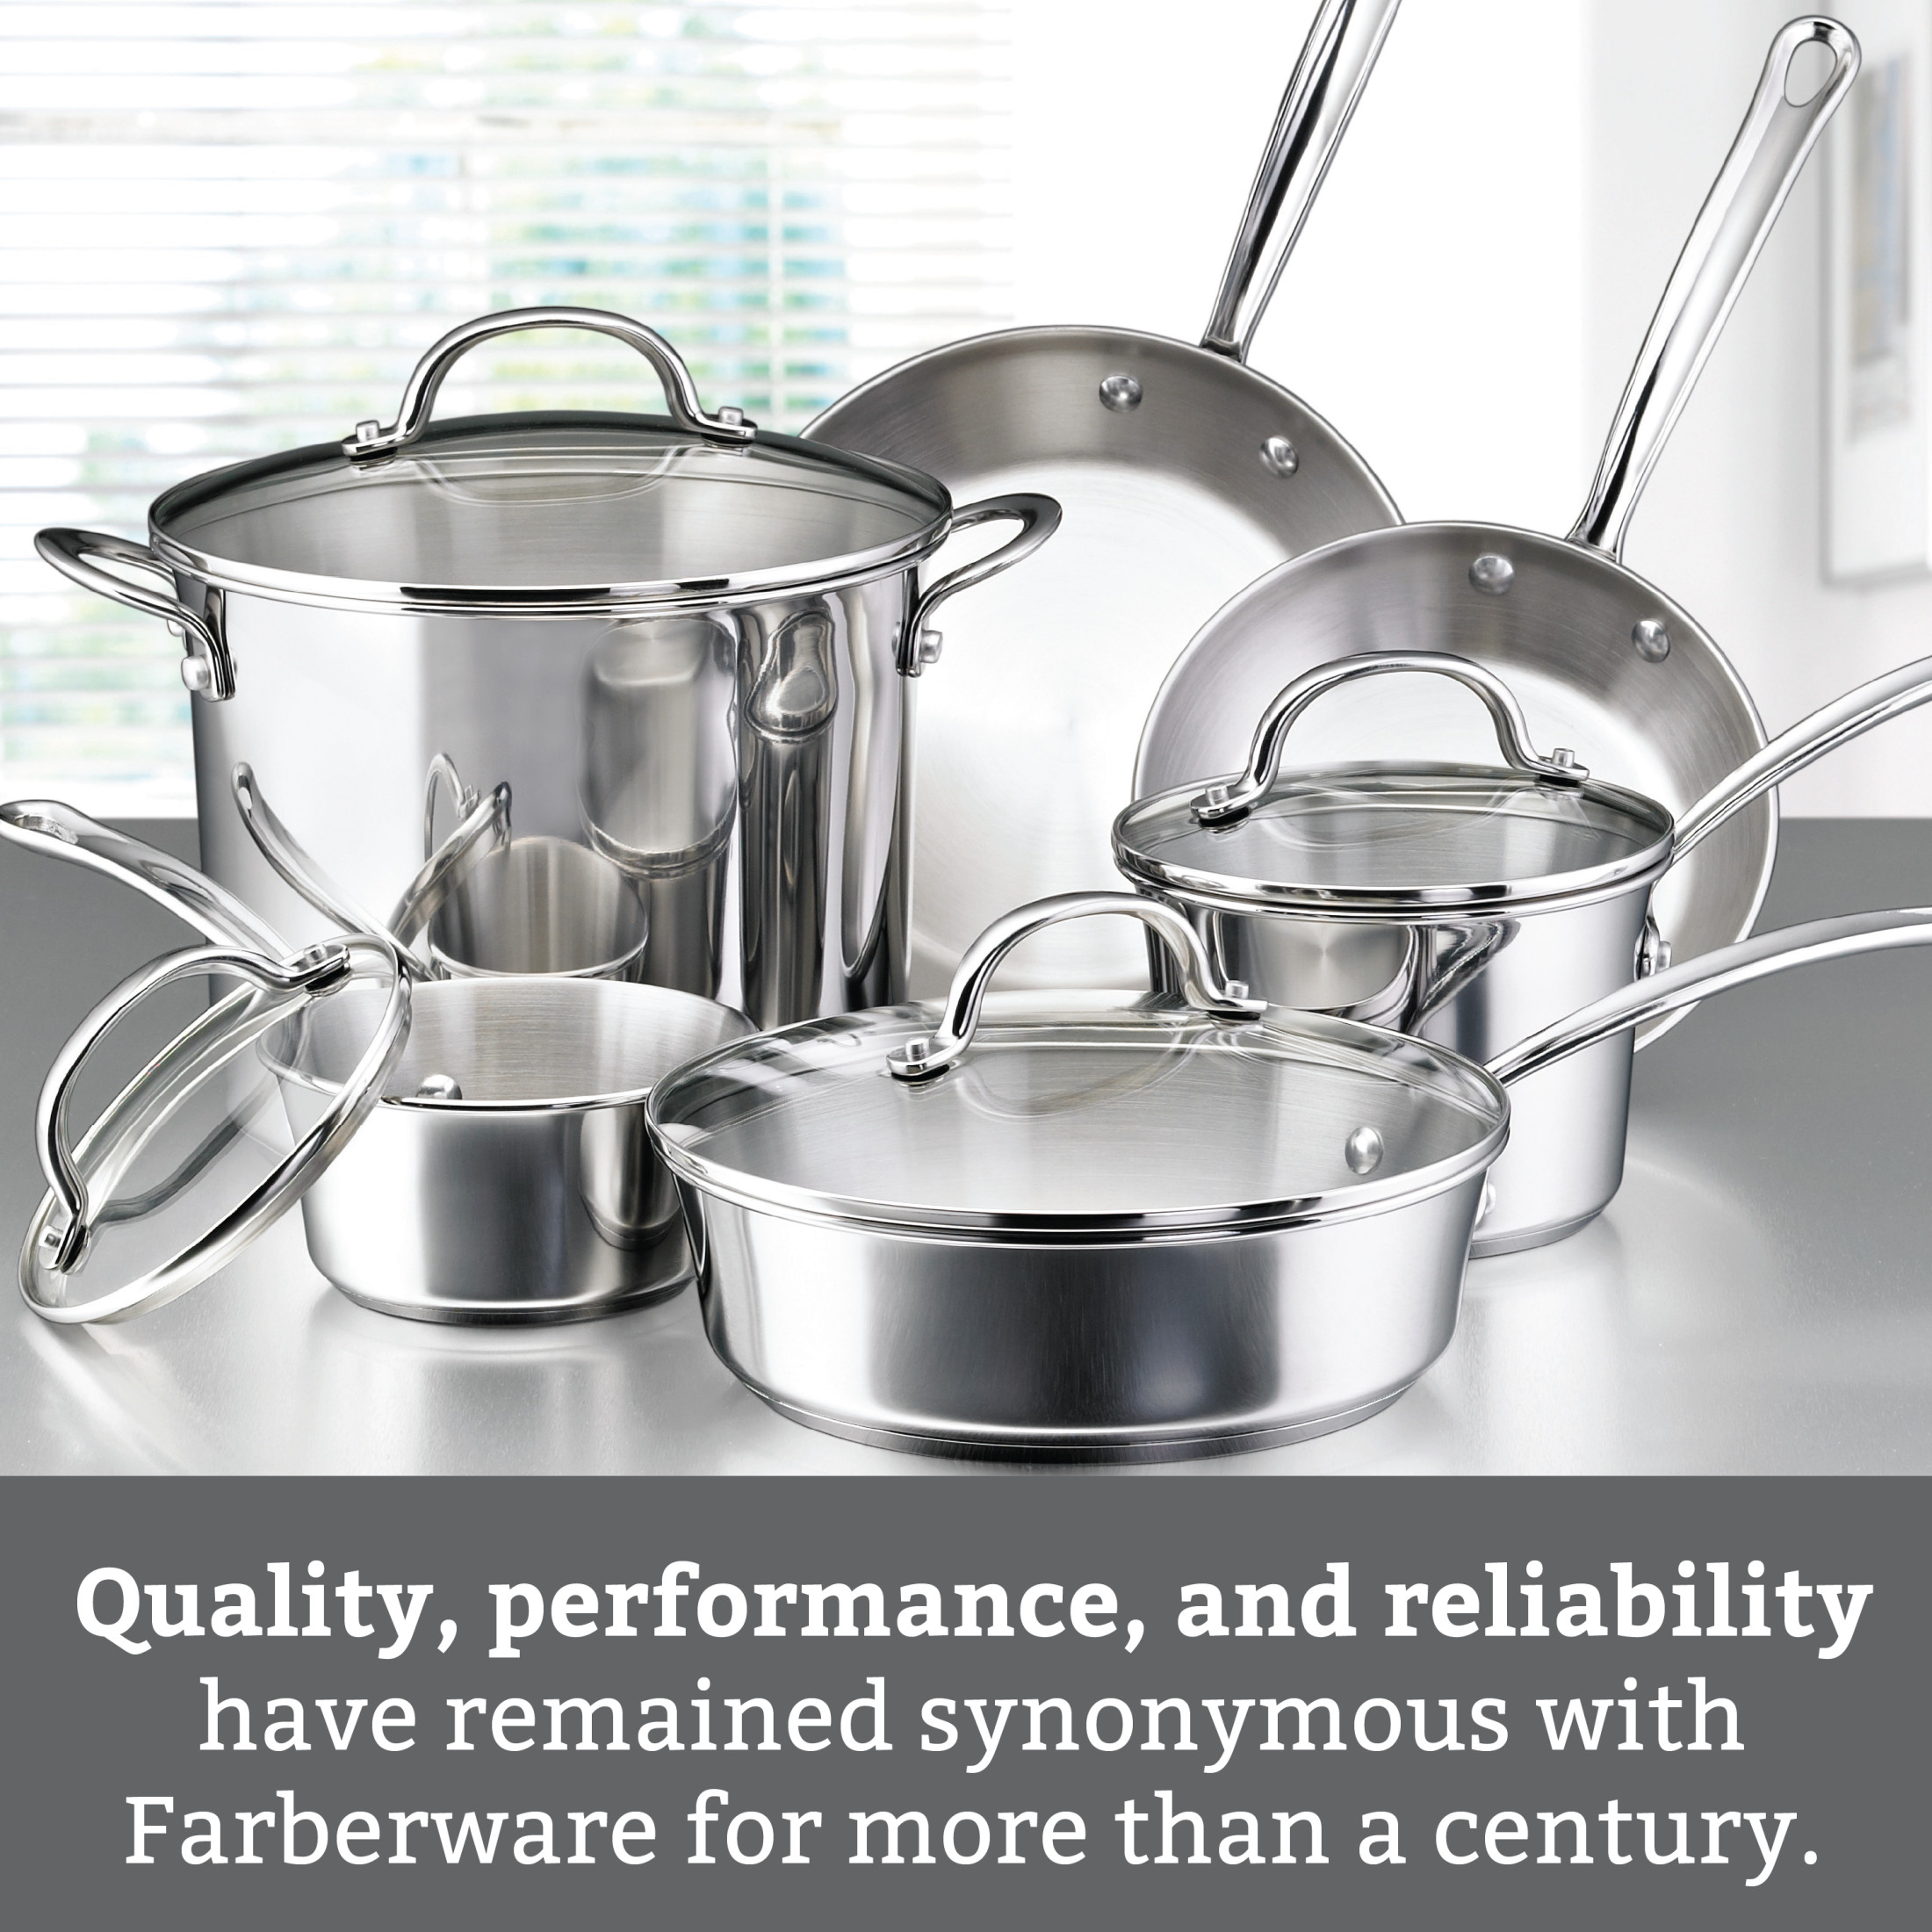 Farberware Millennium 10 Piece Stainless Steel Pots and Pans, Silver - image 3 of 11